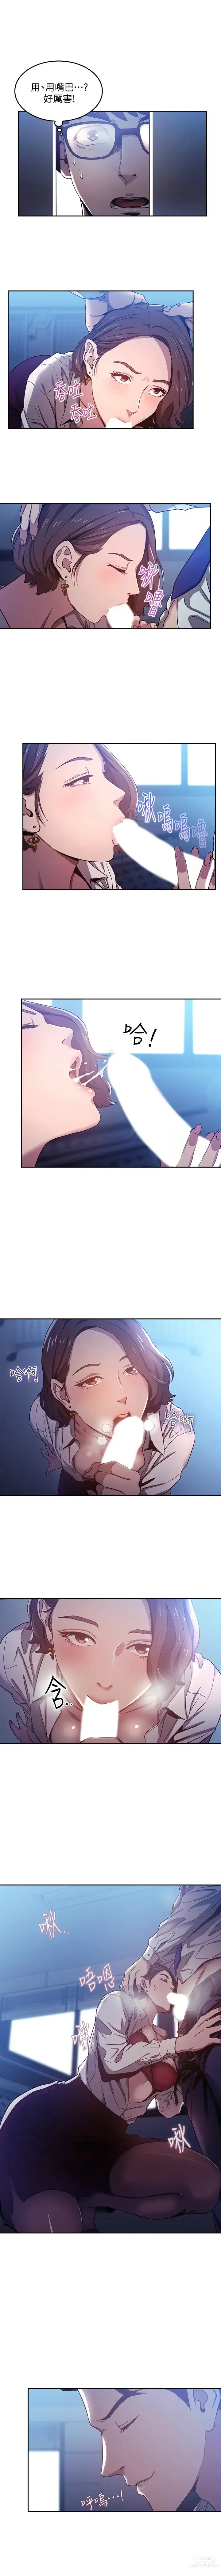 Page 22 of manga 朋友的妈妈/Mother Hunting